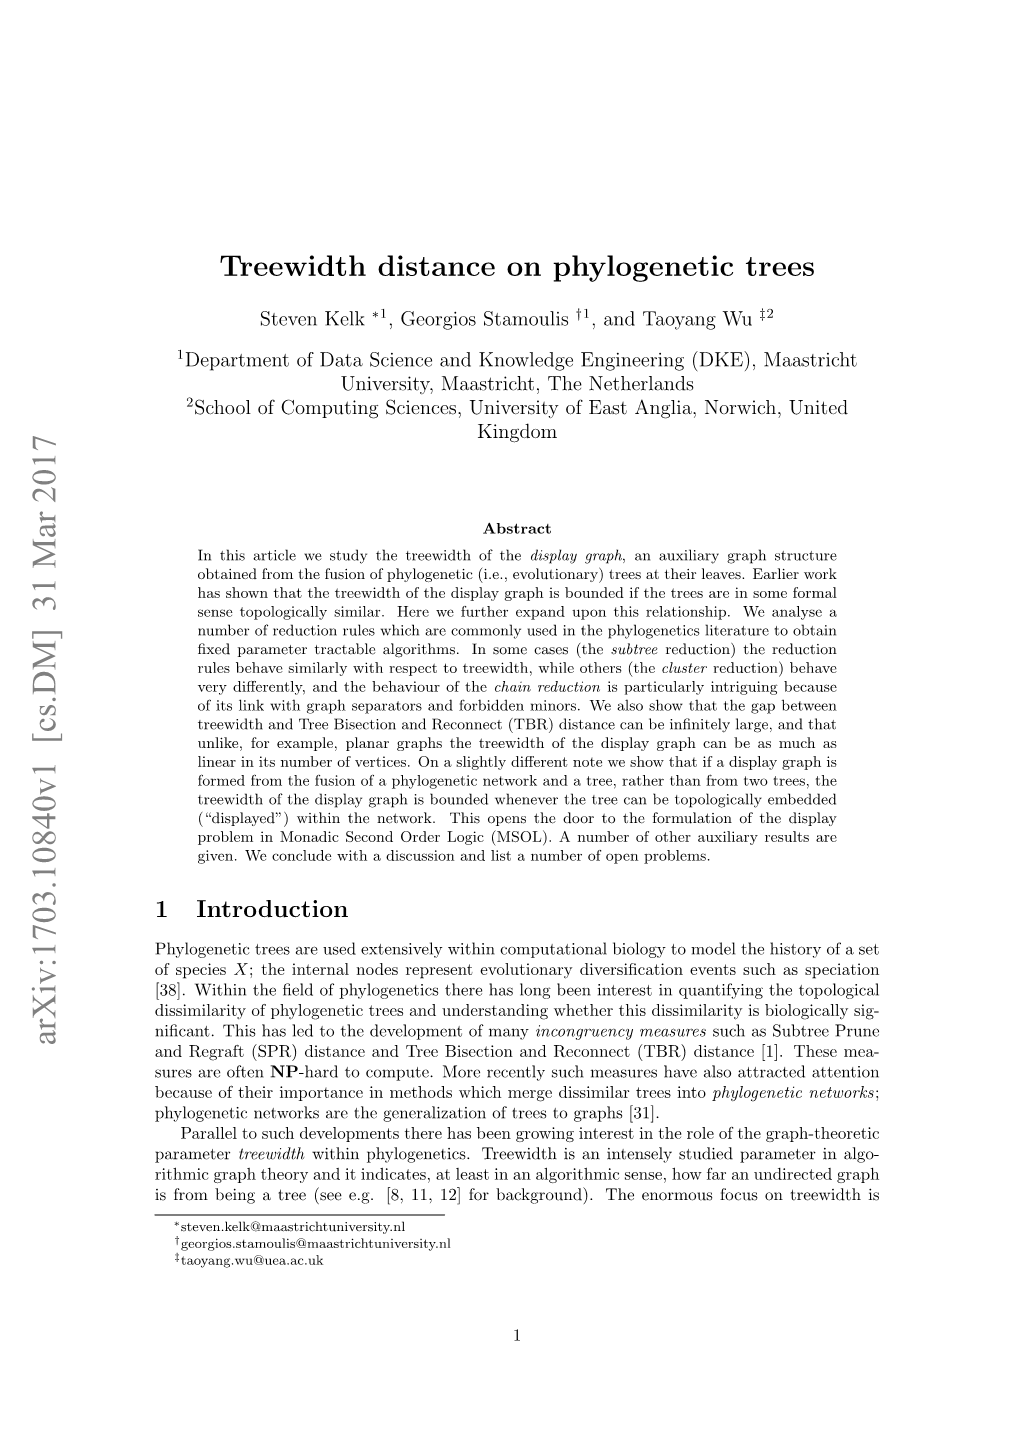 Treewidth Distance on Phylogenetic Trees